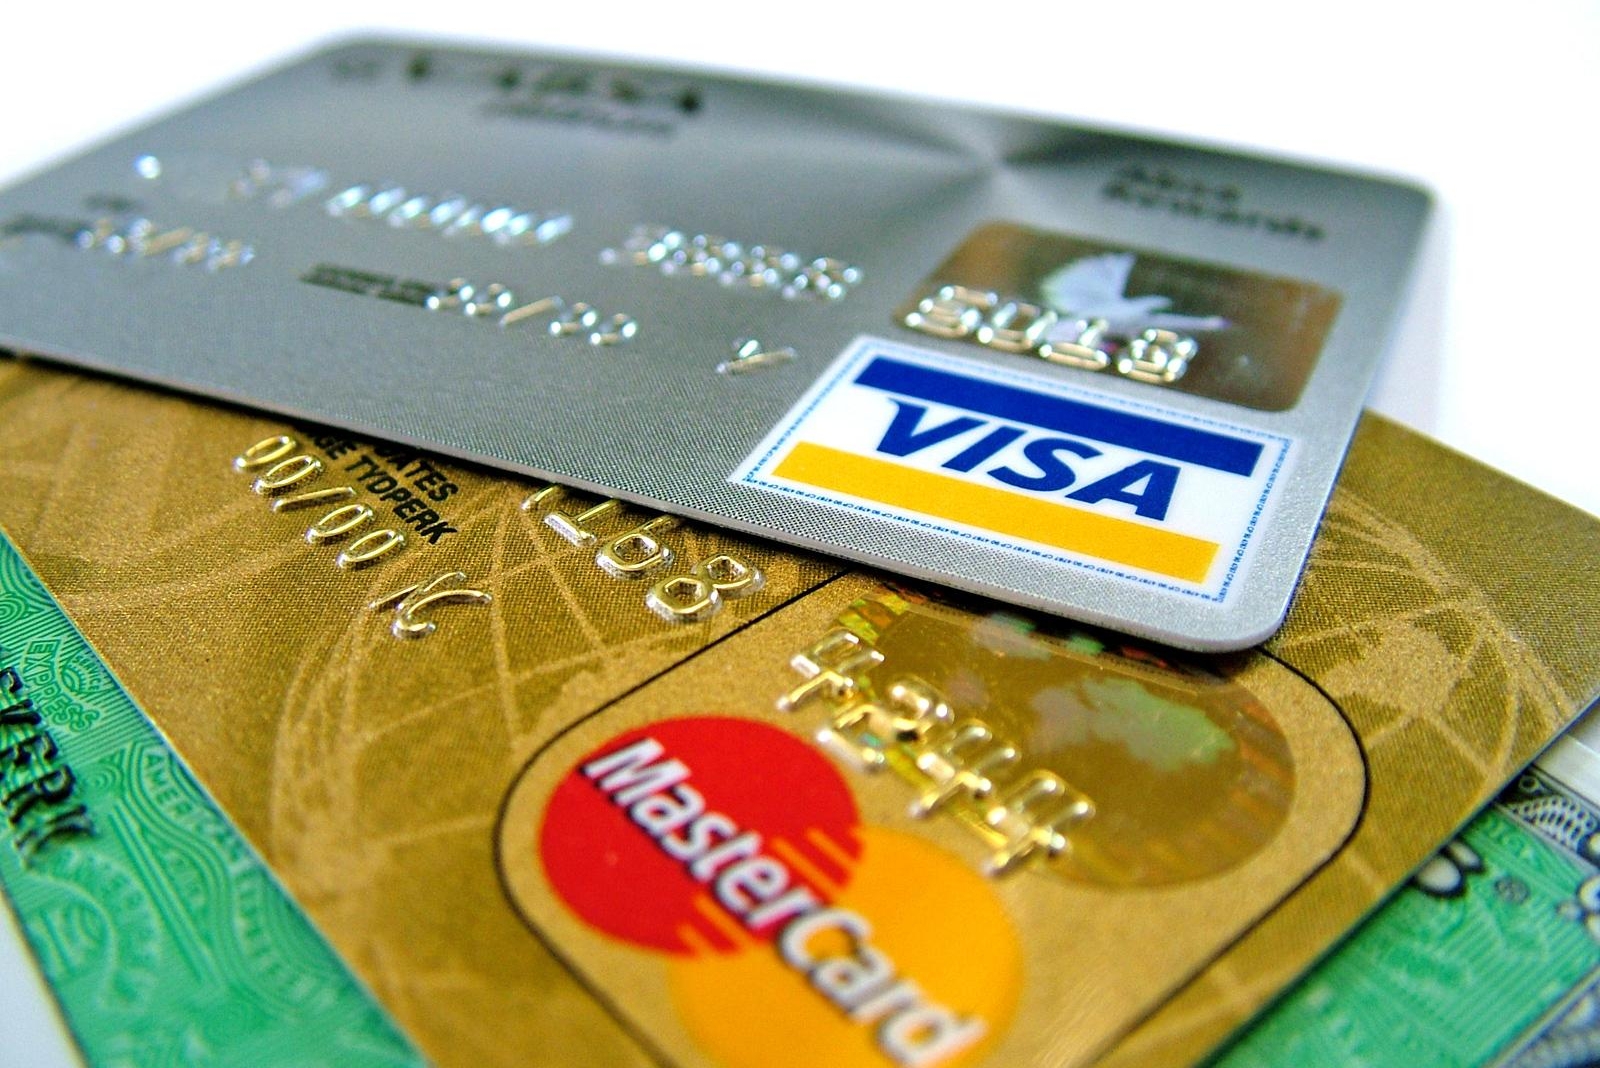 Reasons to Use a Credit Card for Every Purchase